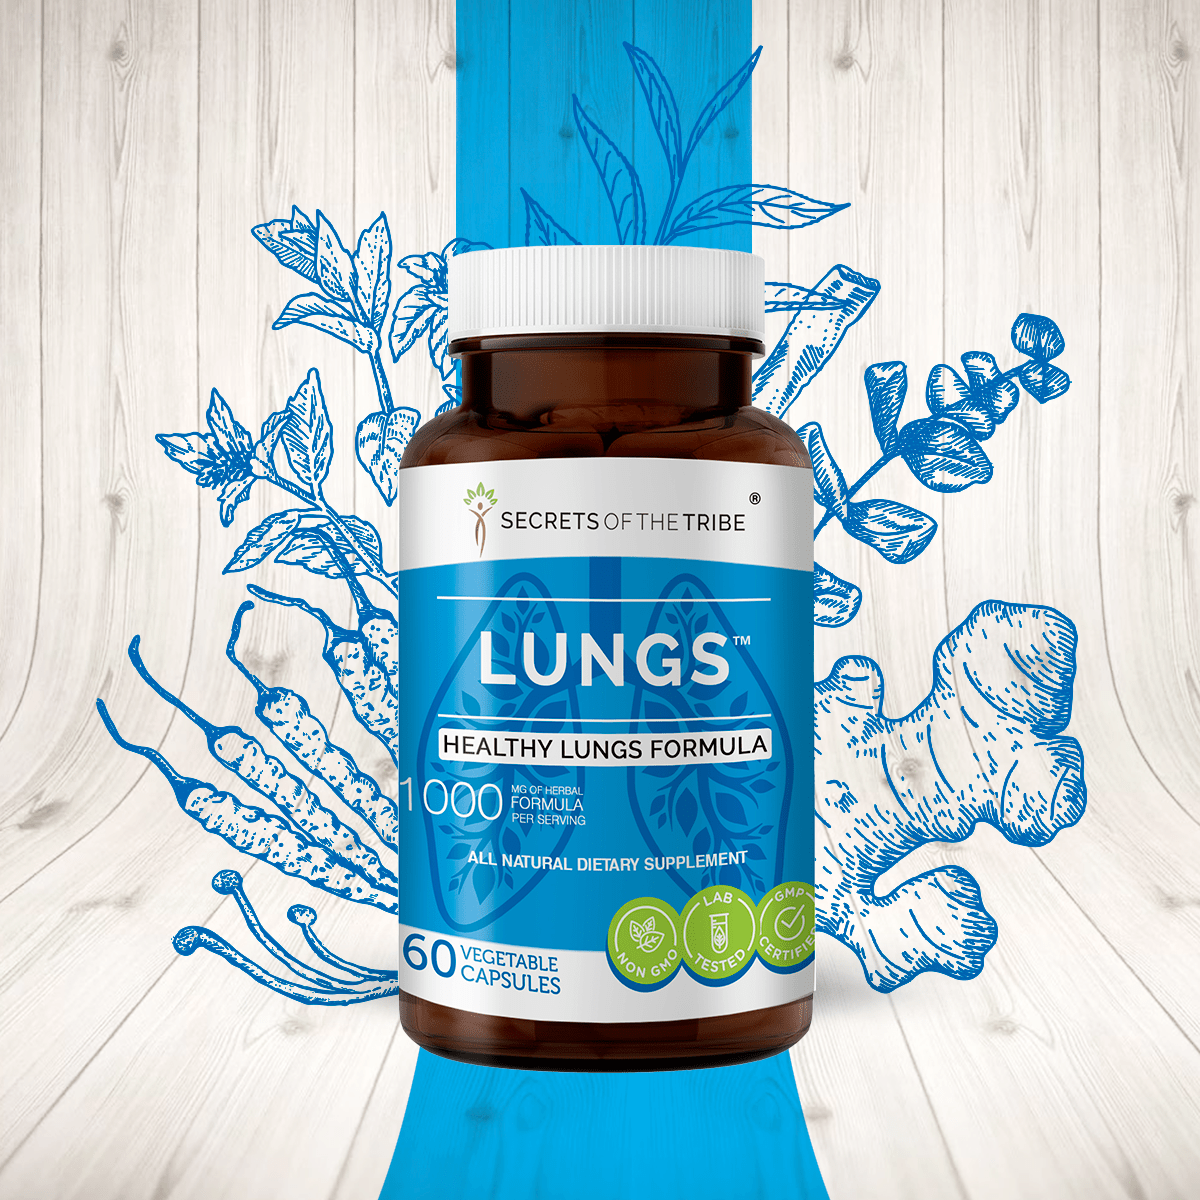 Lungs Capsules. Healthy Lungs Formula